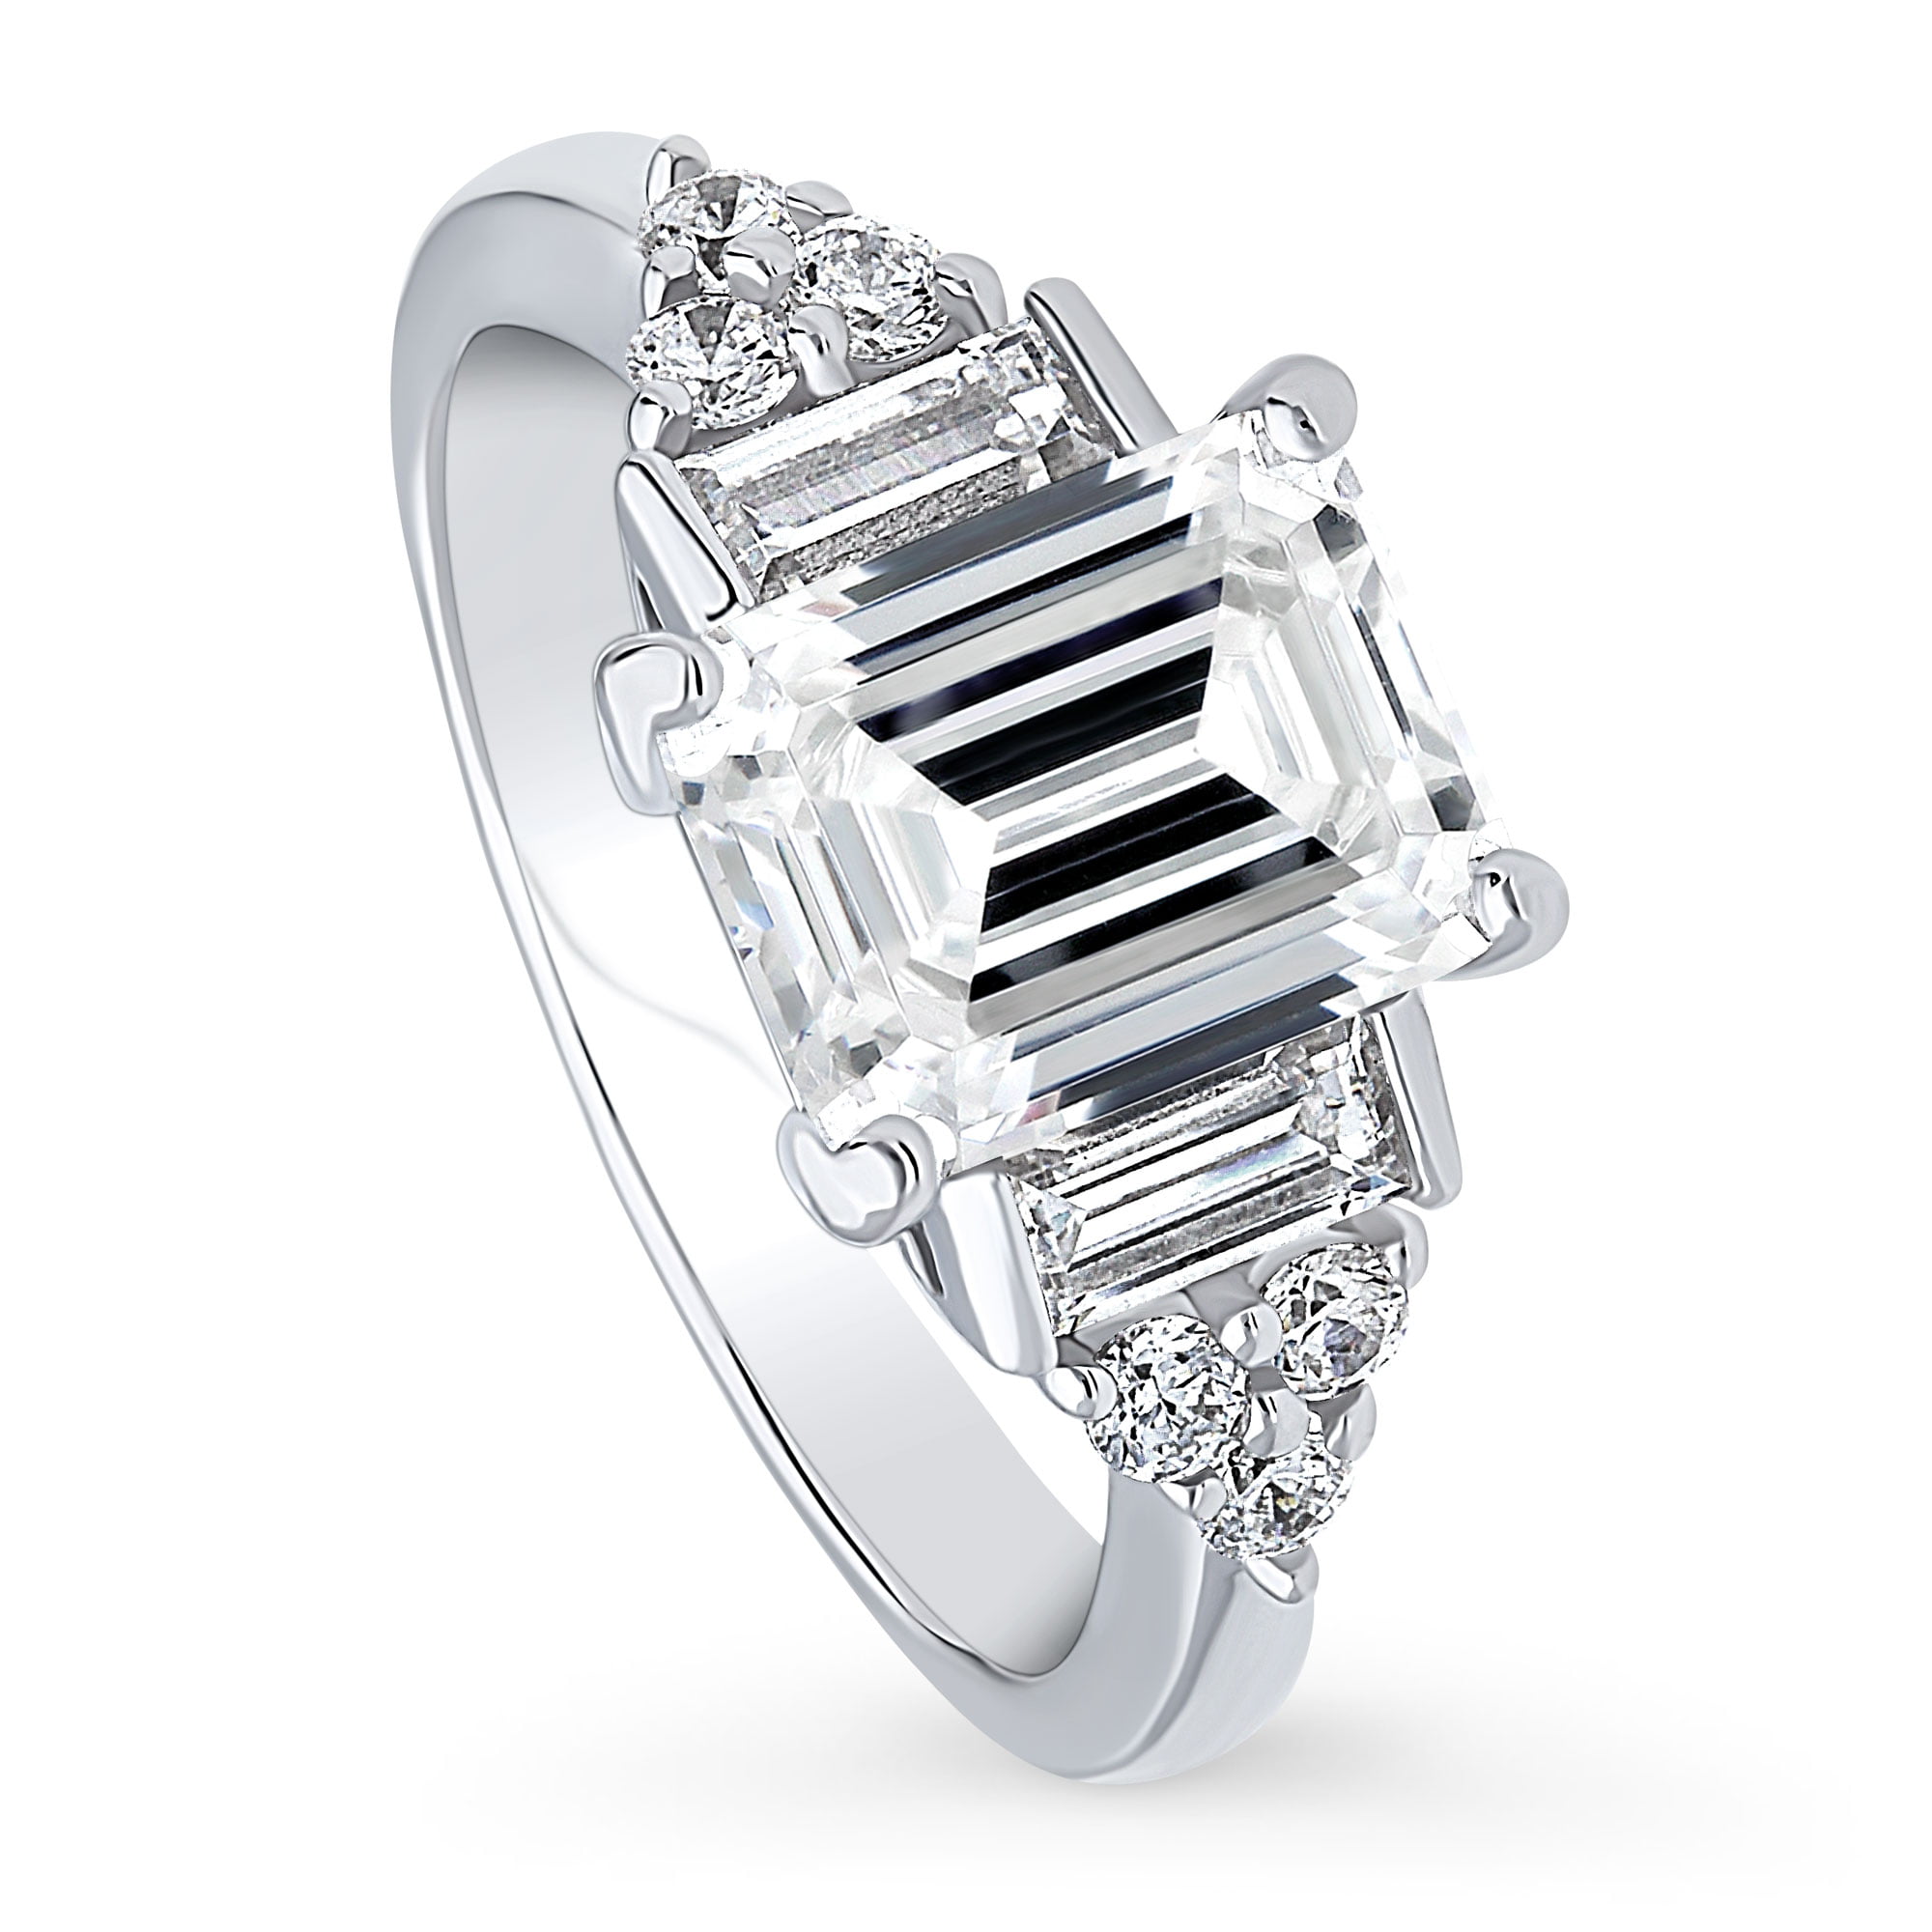 RHODIUM PLATED 925 HALLMARKED STERLING SILVER EMERALD CUT HALO ENGAGEMENT RING 